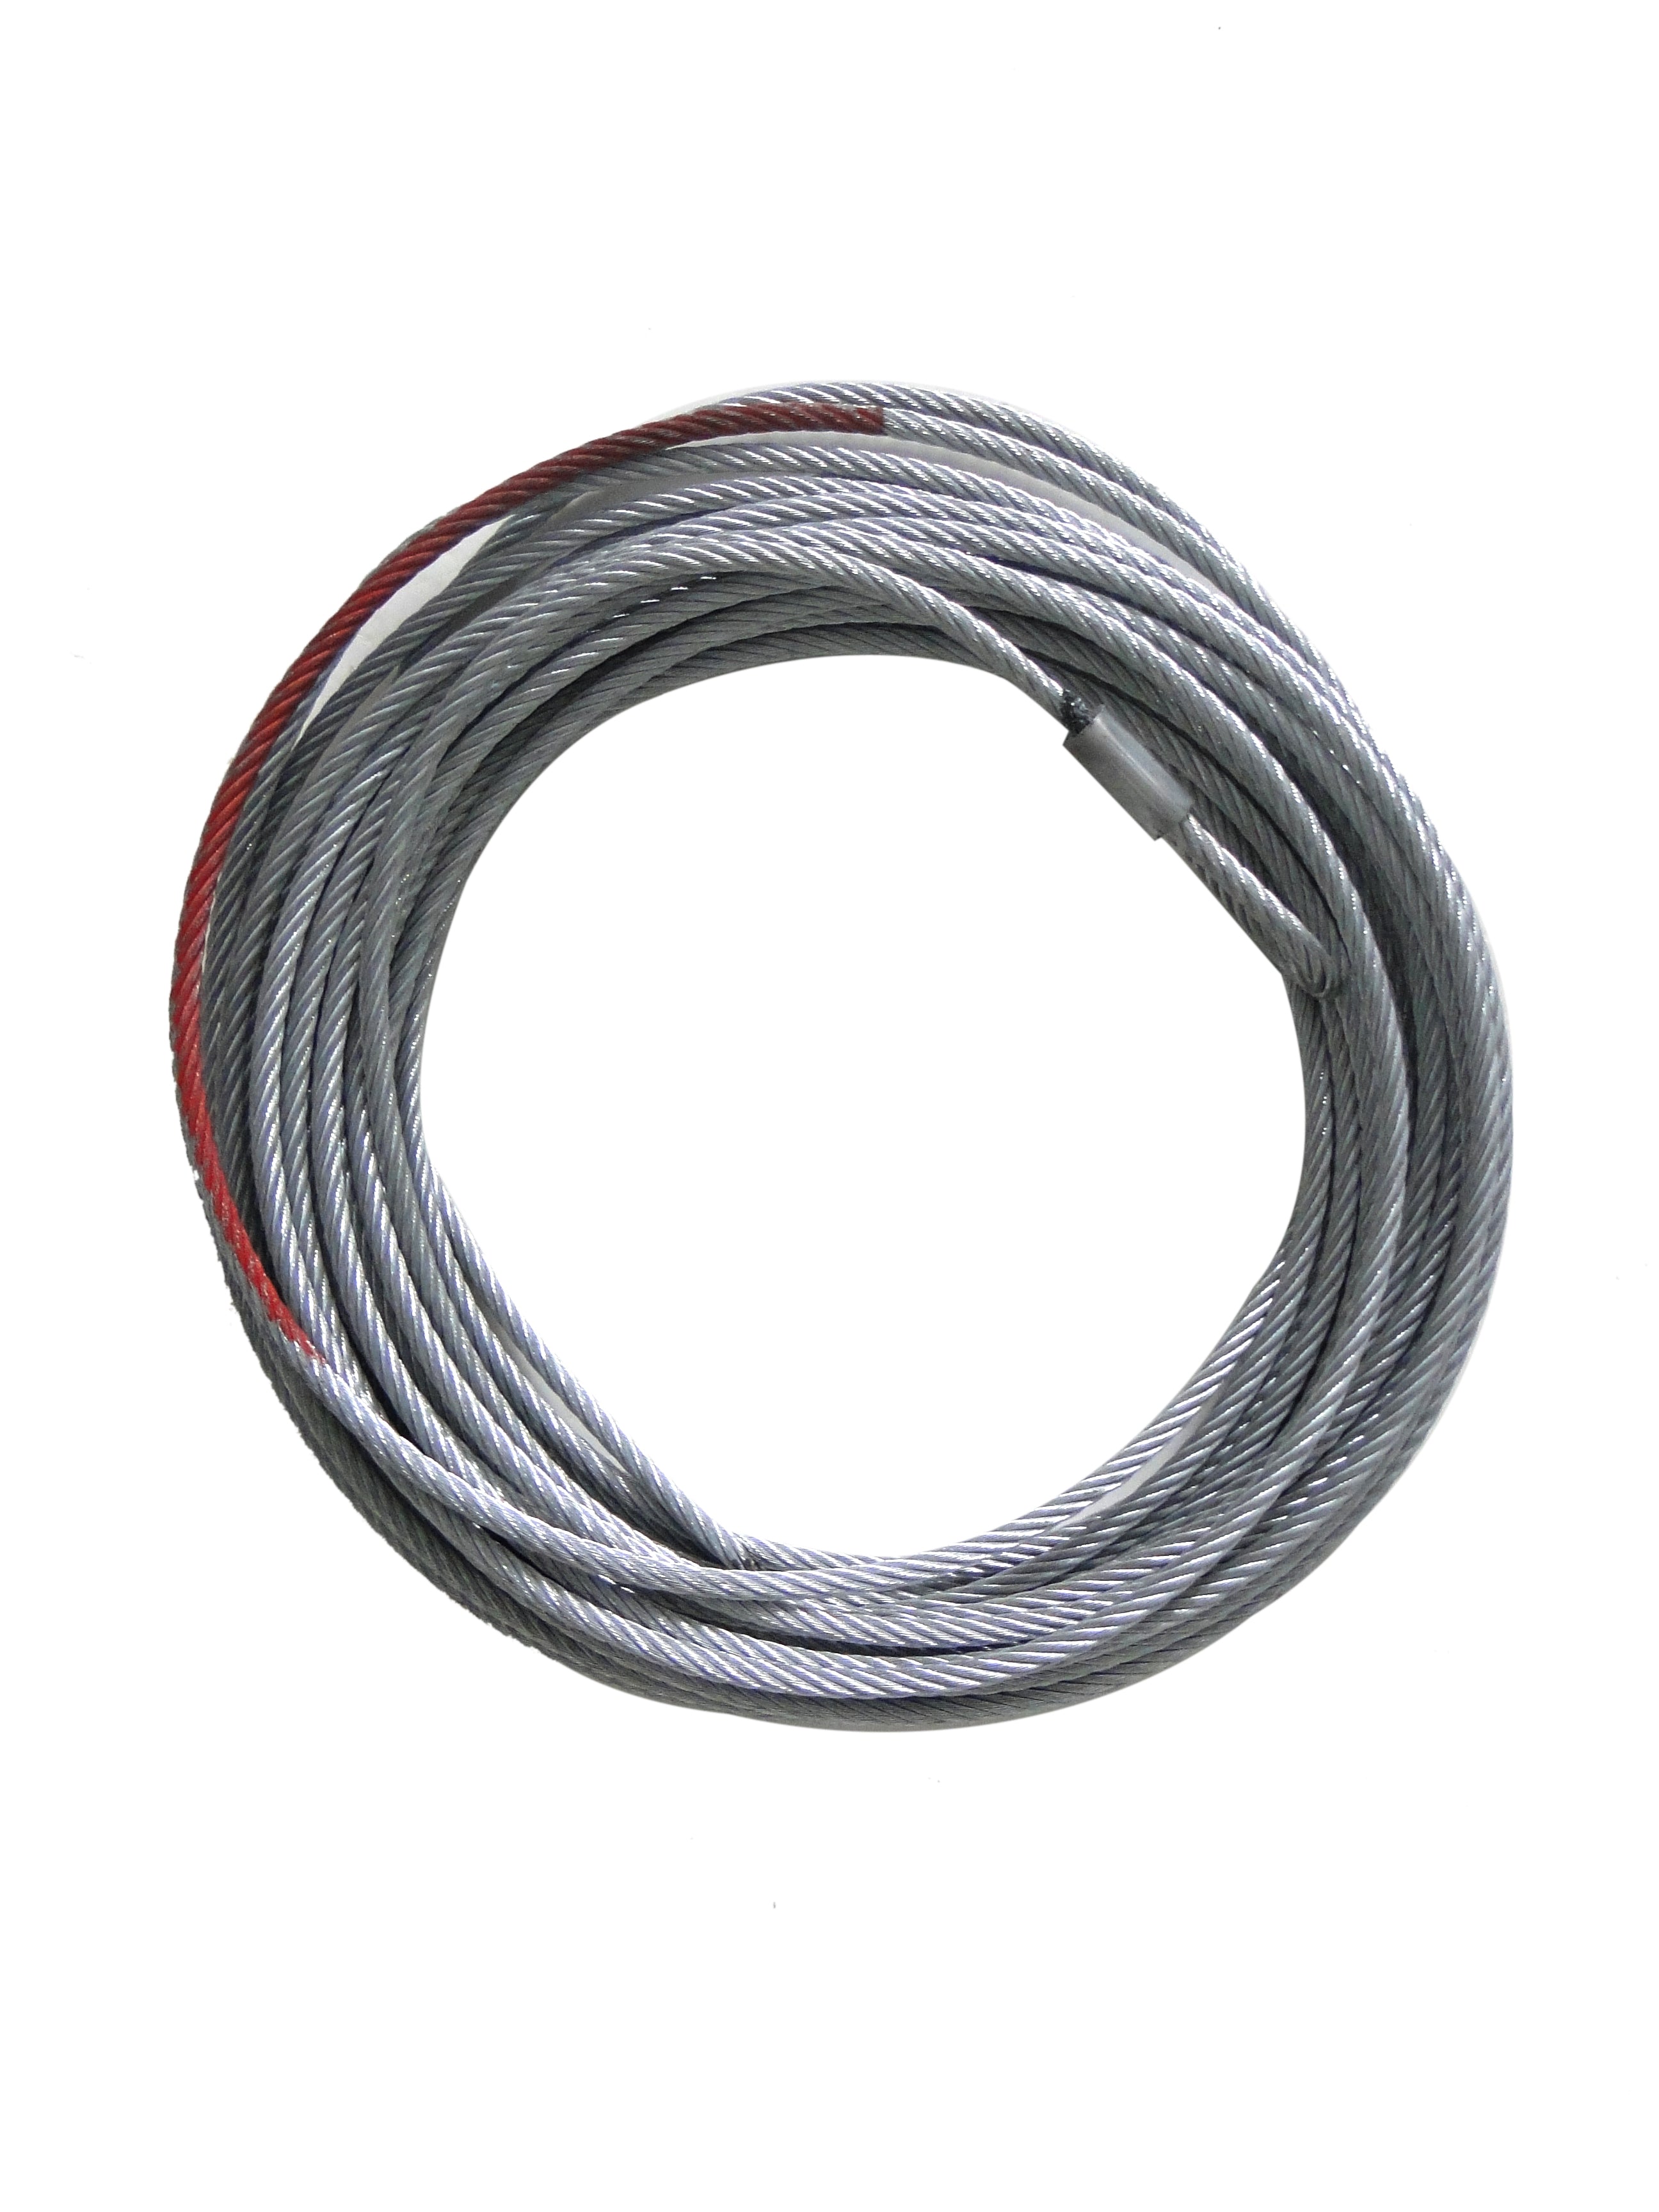 10000 Pound Capacity 9.1 Millimeter Diameter X 94 Foot Length Wire Rope